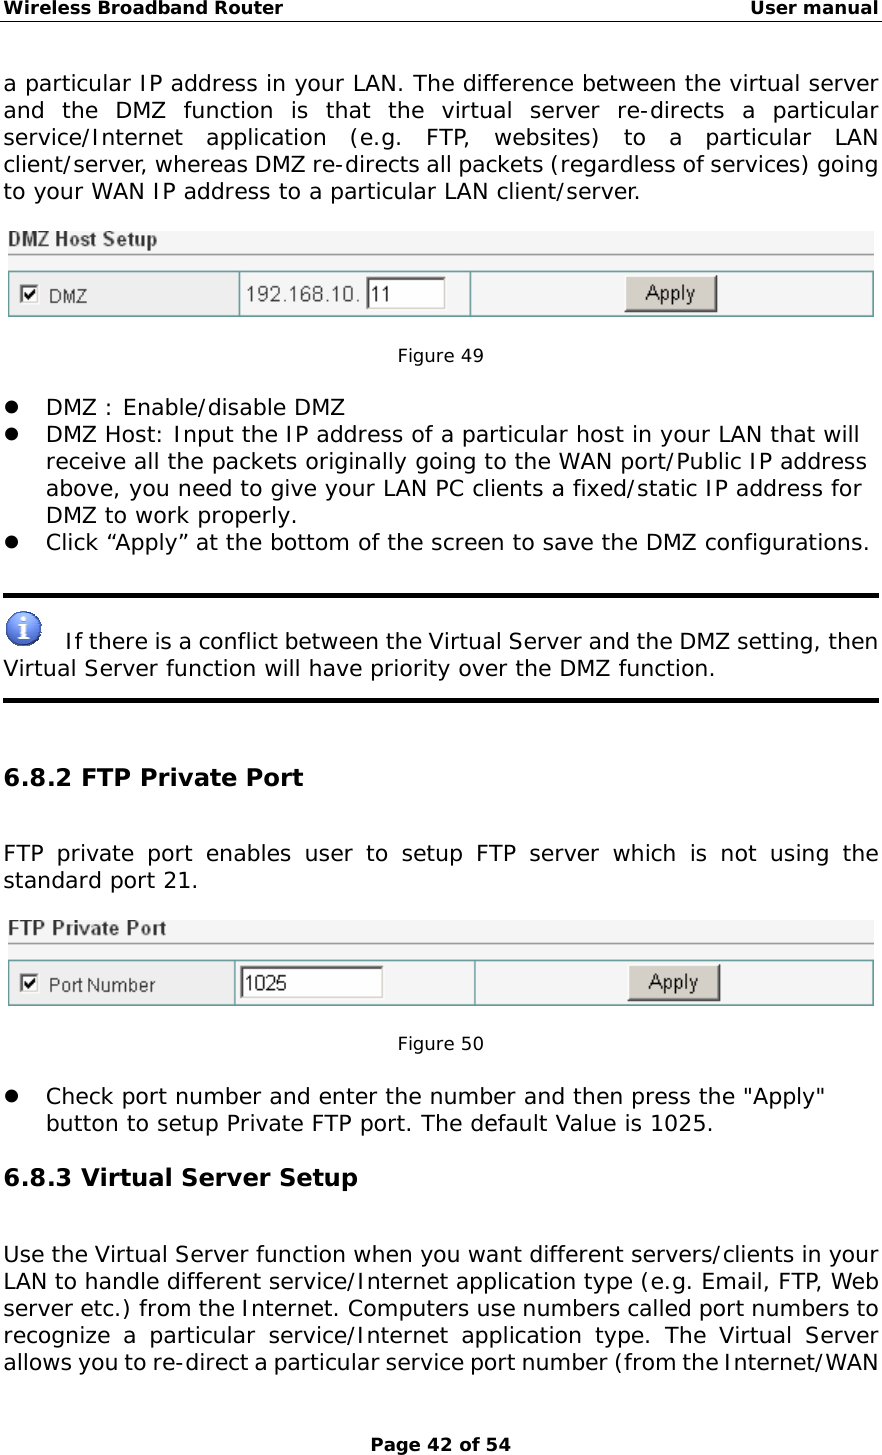 Wireless Broadband Router                                                   User manual Page 42 of 54 a particular IP address in your LAN. The difference between the virtual server and the DMZ function is that the virtual server re-directs a particular service/Internet application (e.g. FTP, websites) to a particular LAN client/server, whereas DMZ re-directs all packets (regardless of services) going to your WAN IP address to a particular LAN client/server.    Figure 49  z DMZ : Enable/disable DMZ z DMZ Host: Input the IP address of a particular host in your LAN that will receive all the packets originally going to the WAN port/Public IP address above, you need to give your LAN PC clients a fixed/static IP address for DMZ to work properly. z Click “Apply” at the bottom of the screen to save the DMZ configurations.       If there is a conflict between the Virtual Server and the DMZ setting, then Virtual Server function will have priority over the DMZ function.    6.8.2 FTP Private Port FTP private port enables user to setup FTP server which is not using the standard port 21.    Figure 50  z Check port number and enter the number and then press the &quot;Apply&quot; button to setup Private FTP port. The default Value is 1025. 6.8.3 Virtual Server Setup Use the Virtual Server function when you want different servers/clients in your LAN to handle different service/Internet application type (e.g. Email, FTP, Web server etc.) from the Internet. Computers use numbers called port numbers to recognize a particular service/Internet application type. The Virtual Server allows you to re-direct a particular service port number (from the Internet/WAN 